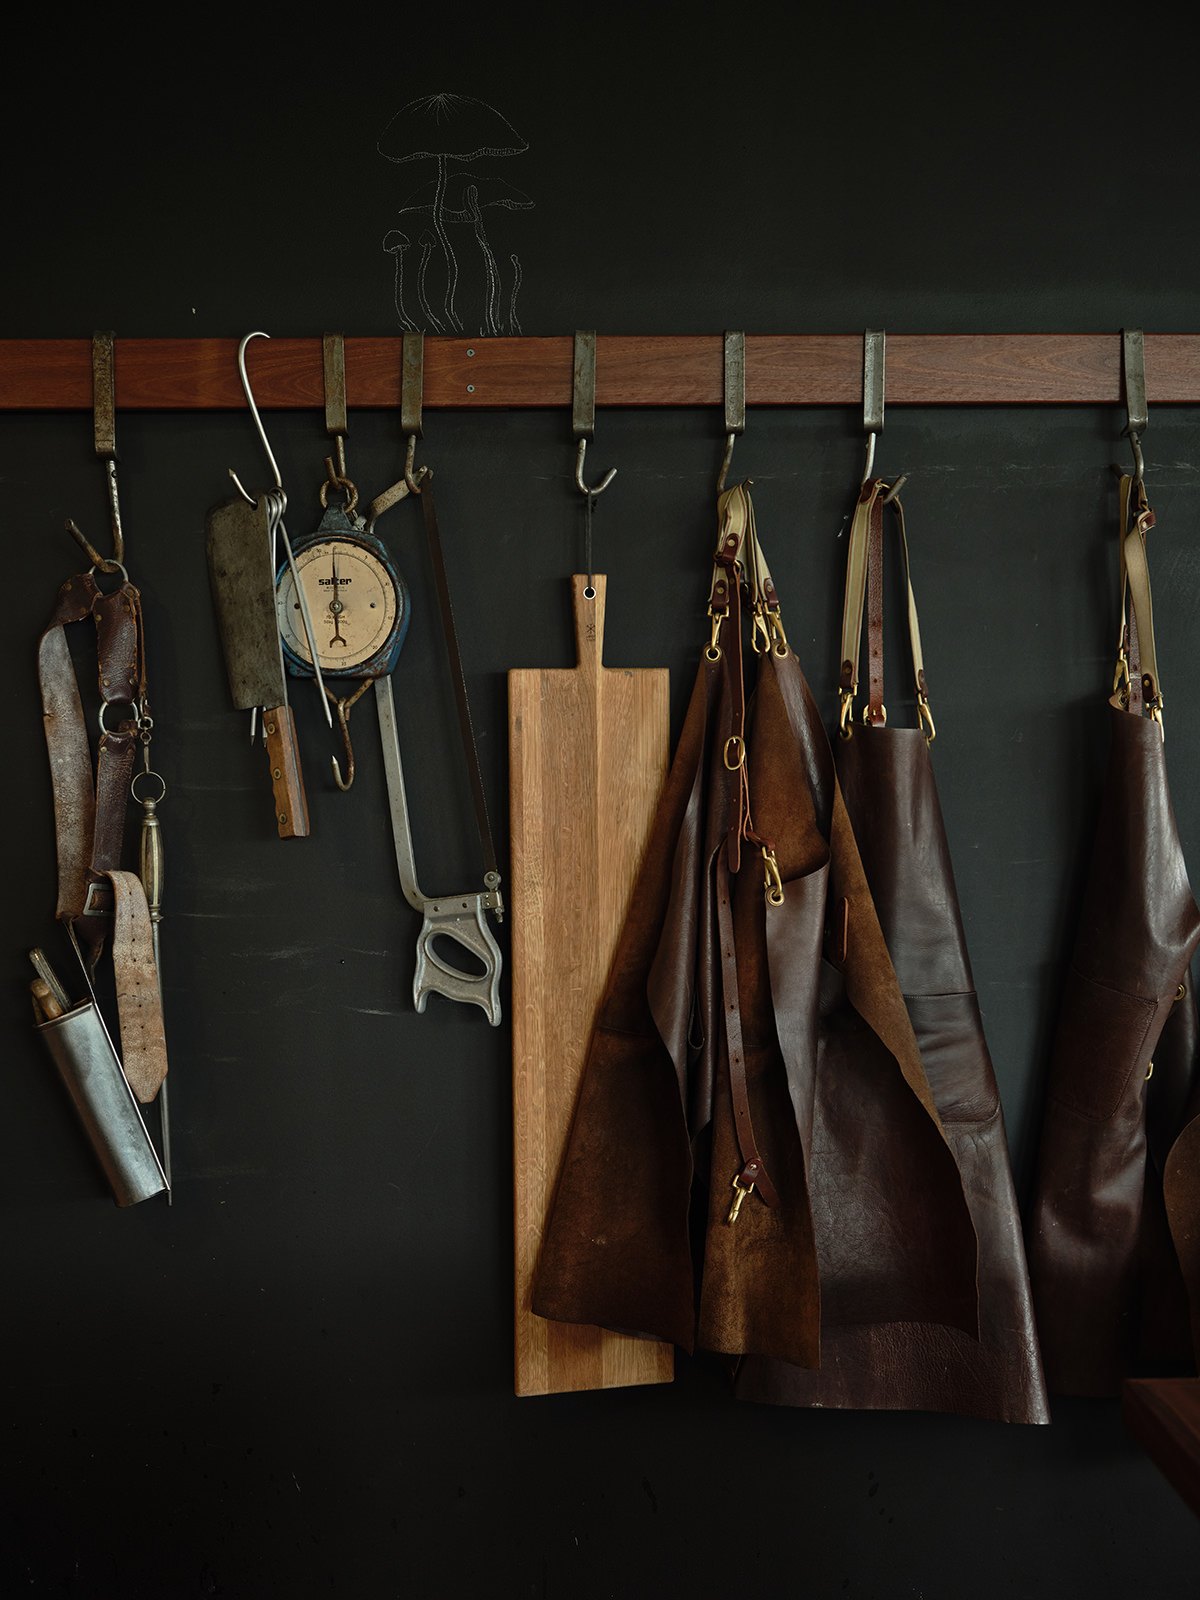 Trevor’s dad’s butchery tools on display at Hogget.